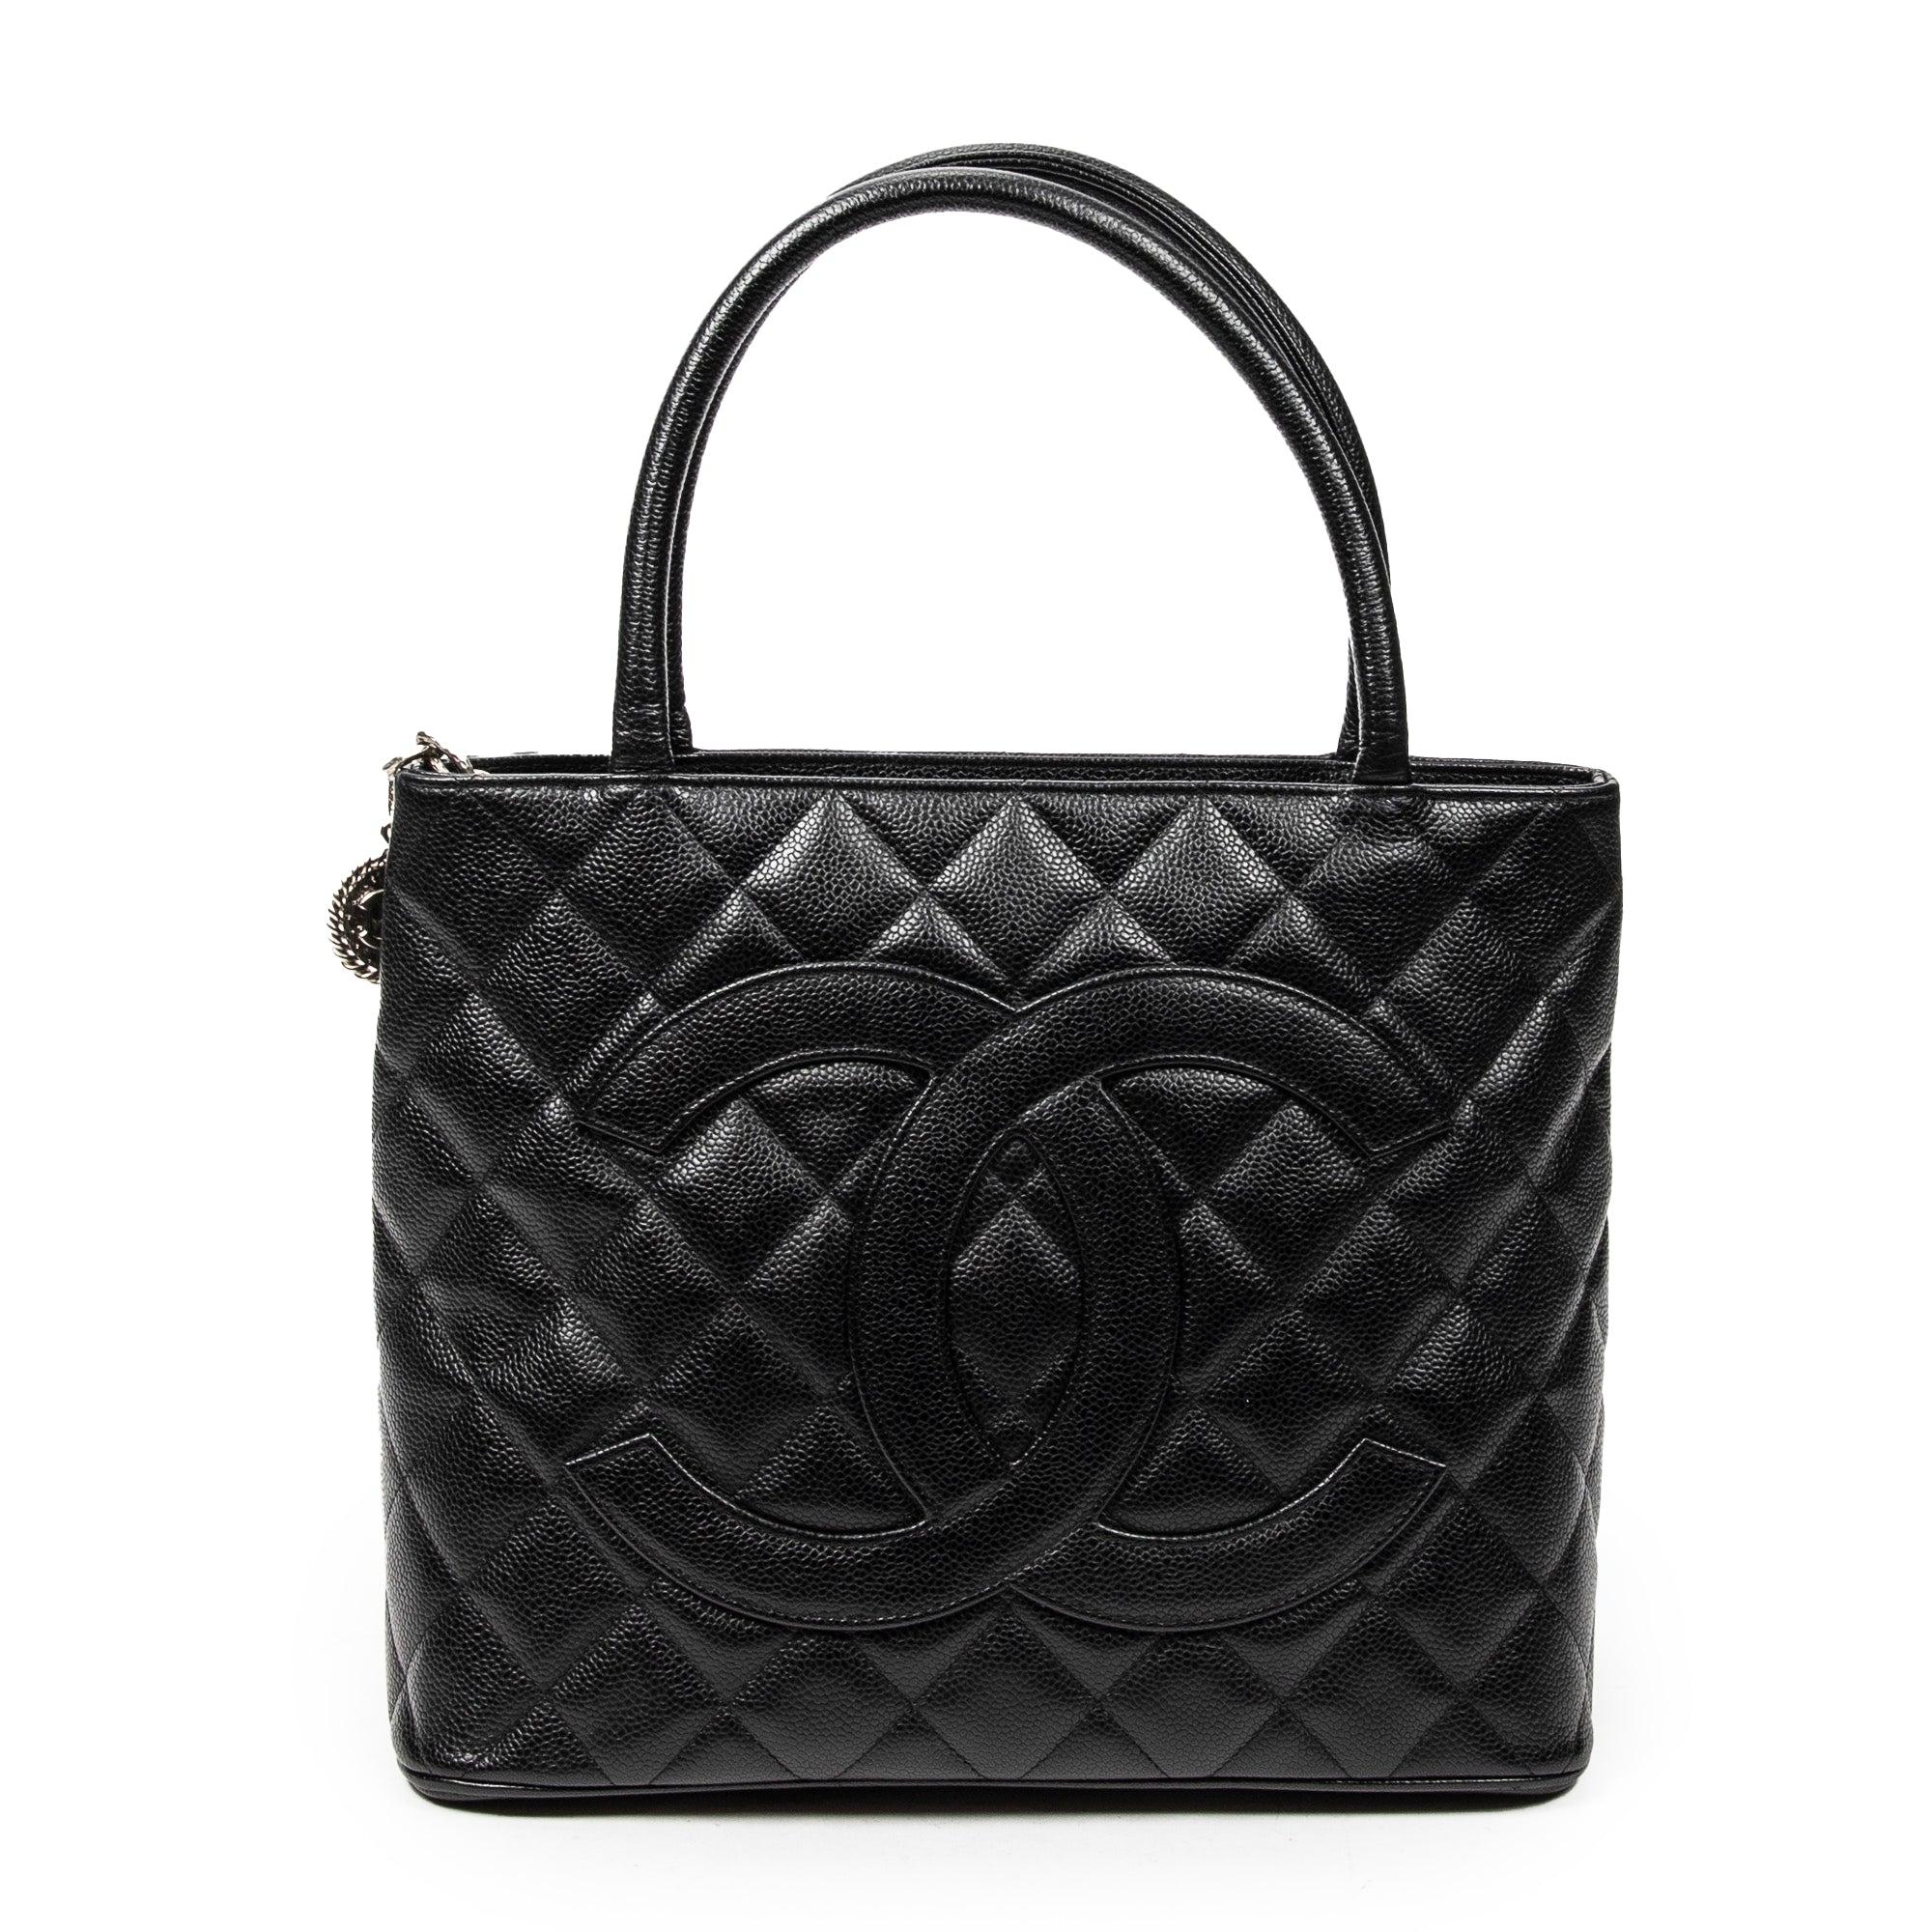 2005 Chanel Black Quilted Caviar Leather Small Classic Double Flap